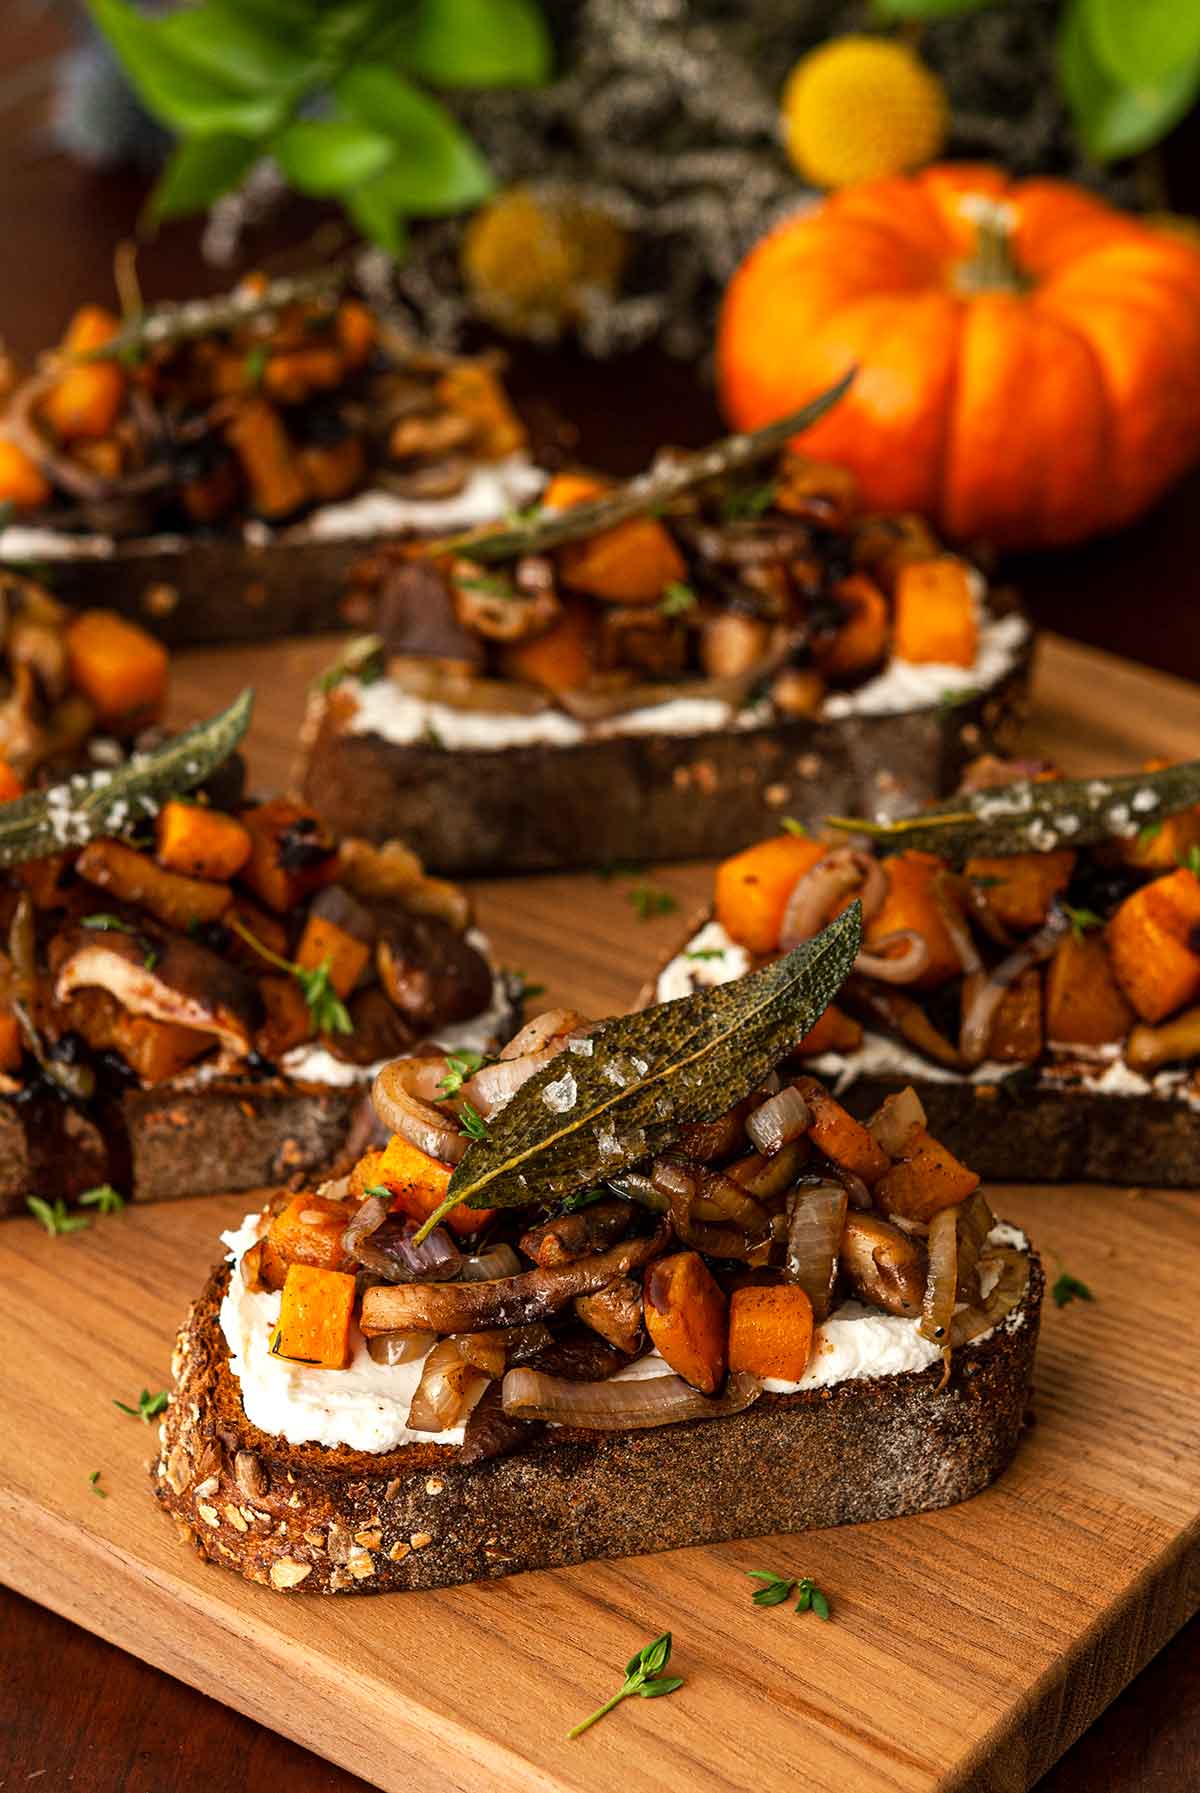 5 maple butternut squash crostini on a board in front of a pumpkin and greenery.